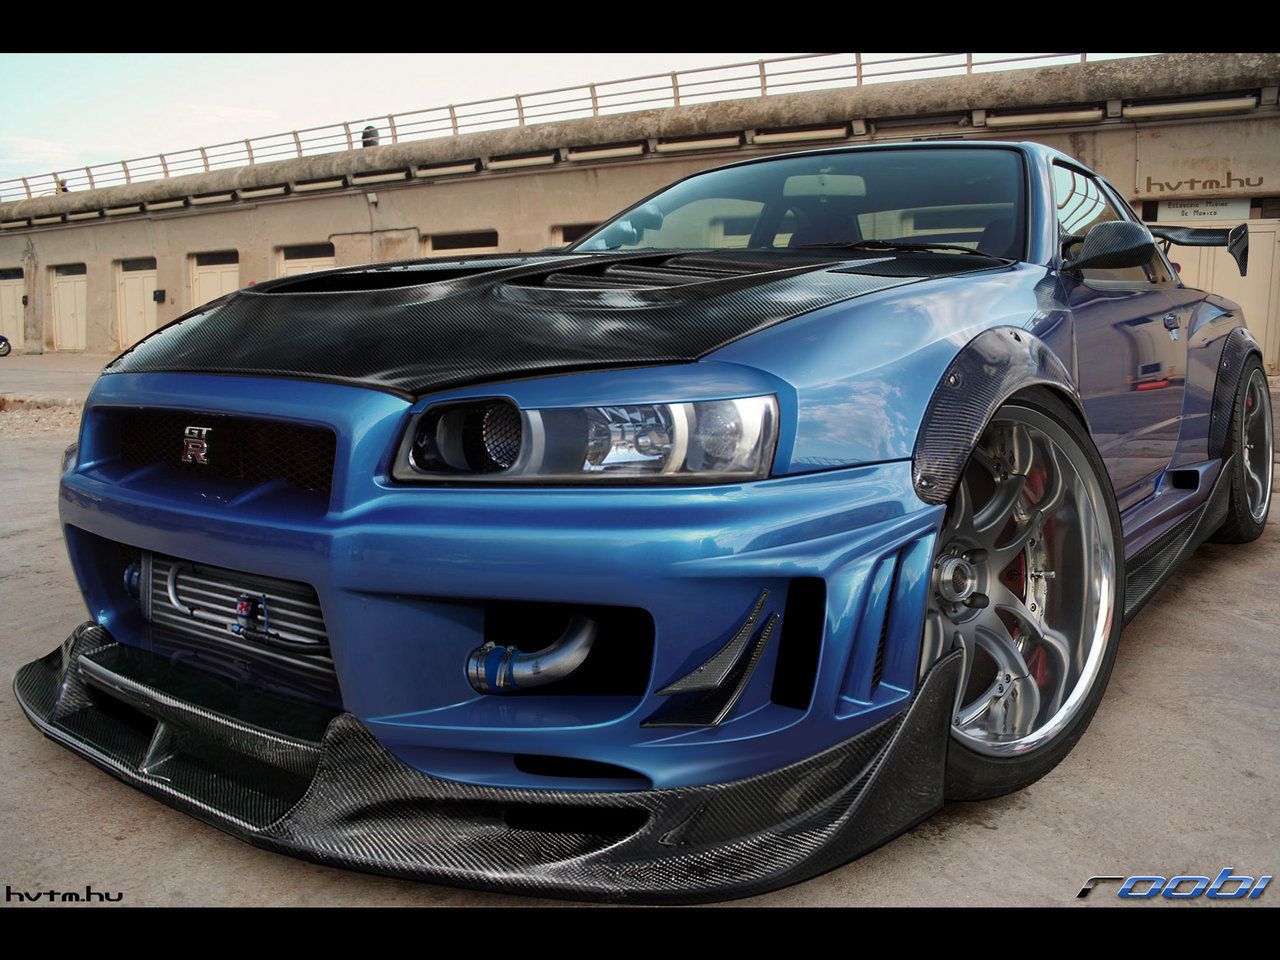 Skyline Car Wallpaper Pack, by Christina Fout, Monday 21st